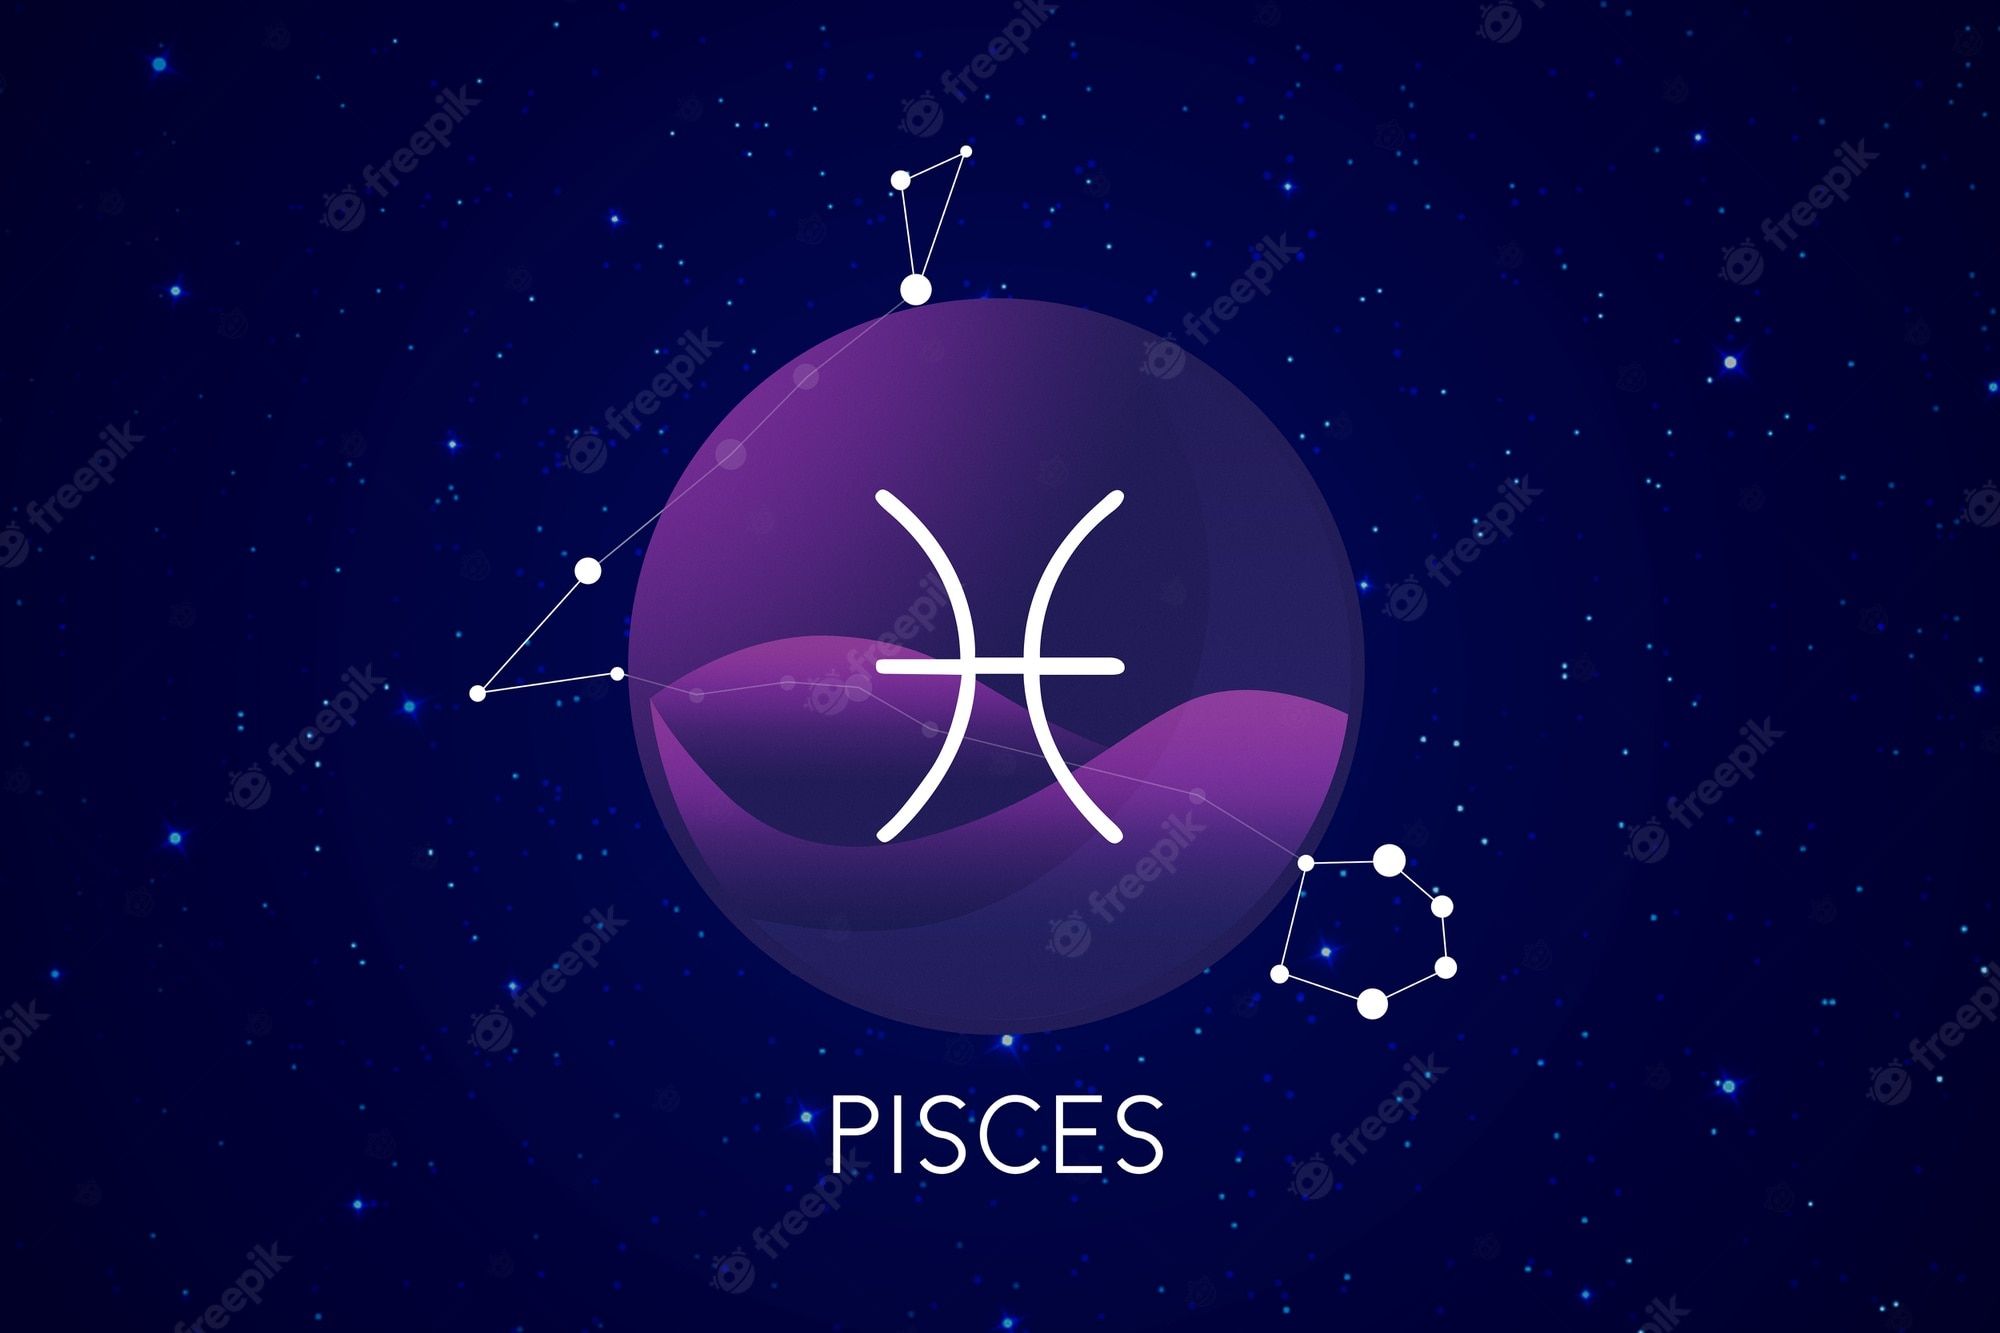 Pisces zodiac sign with stars and planets - Pisces